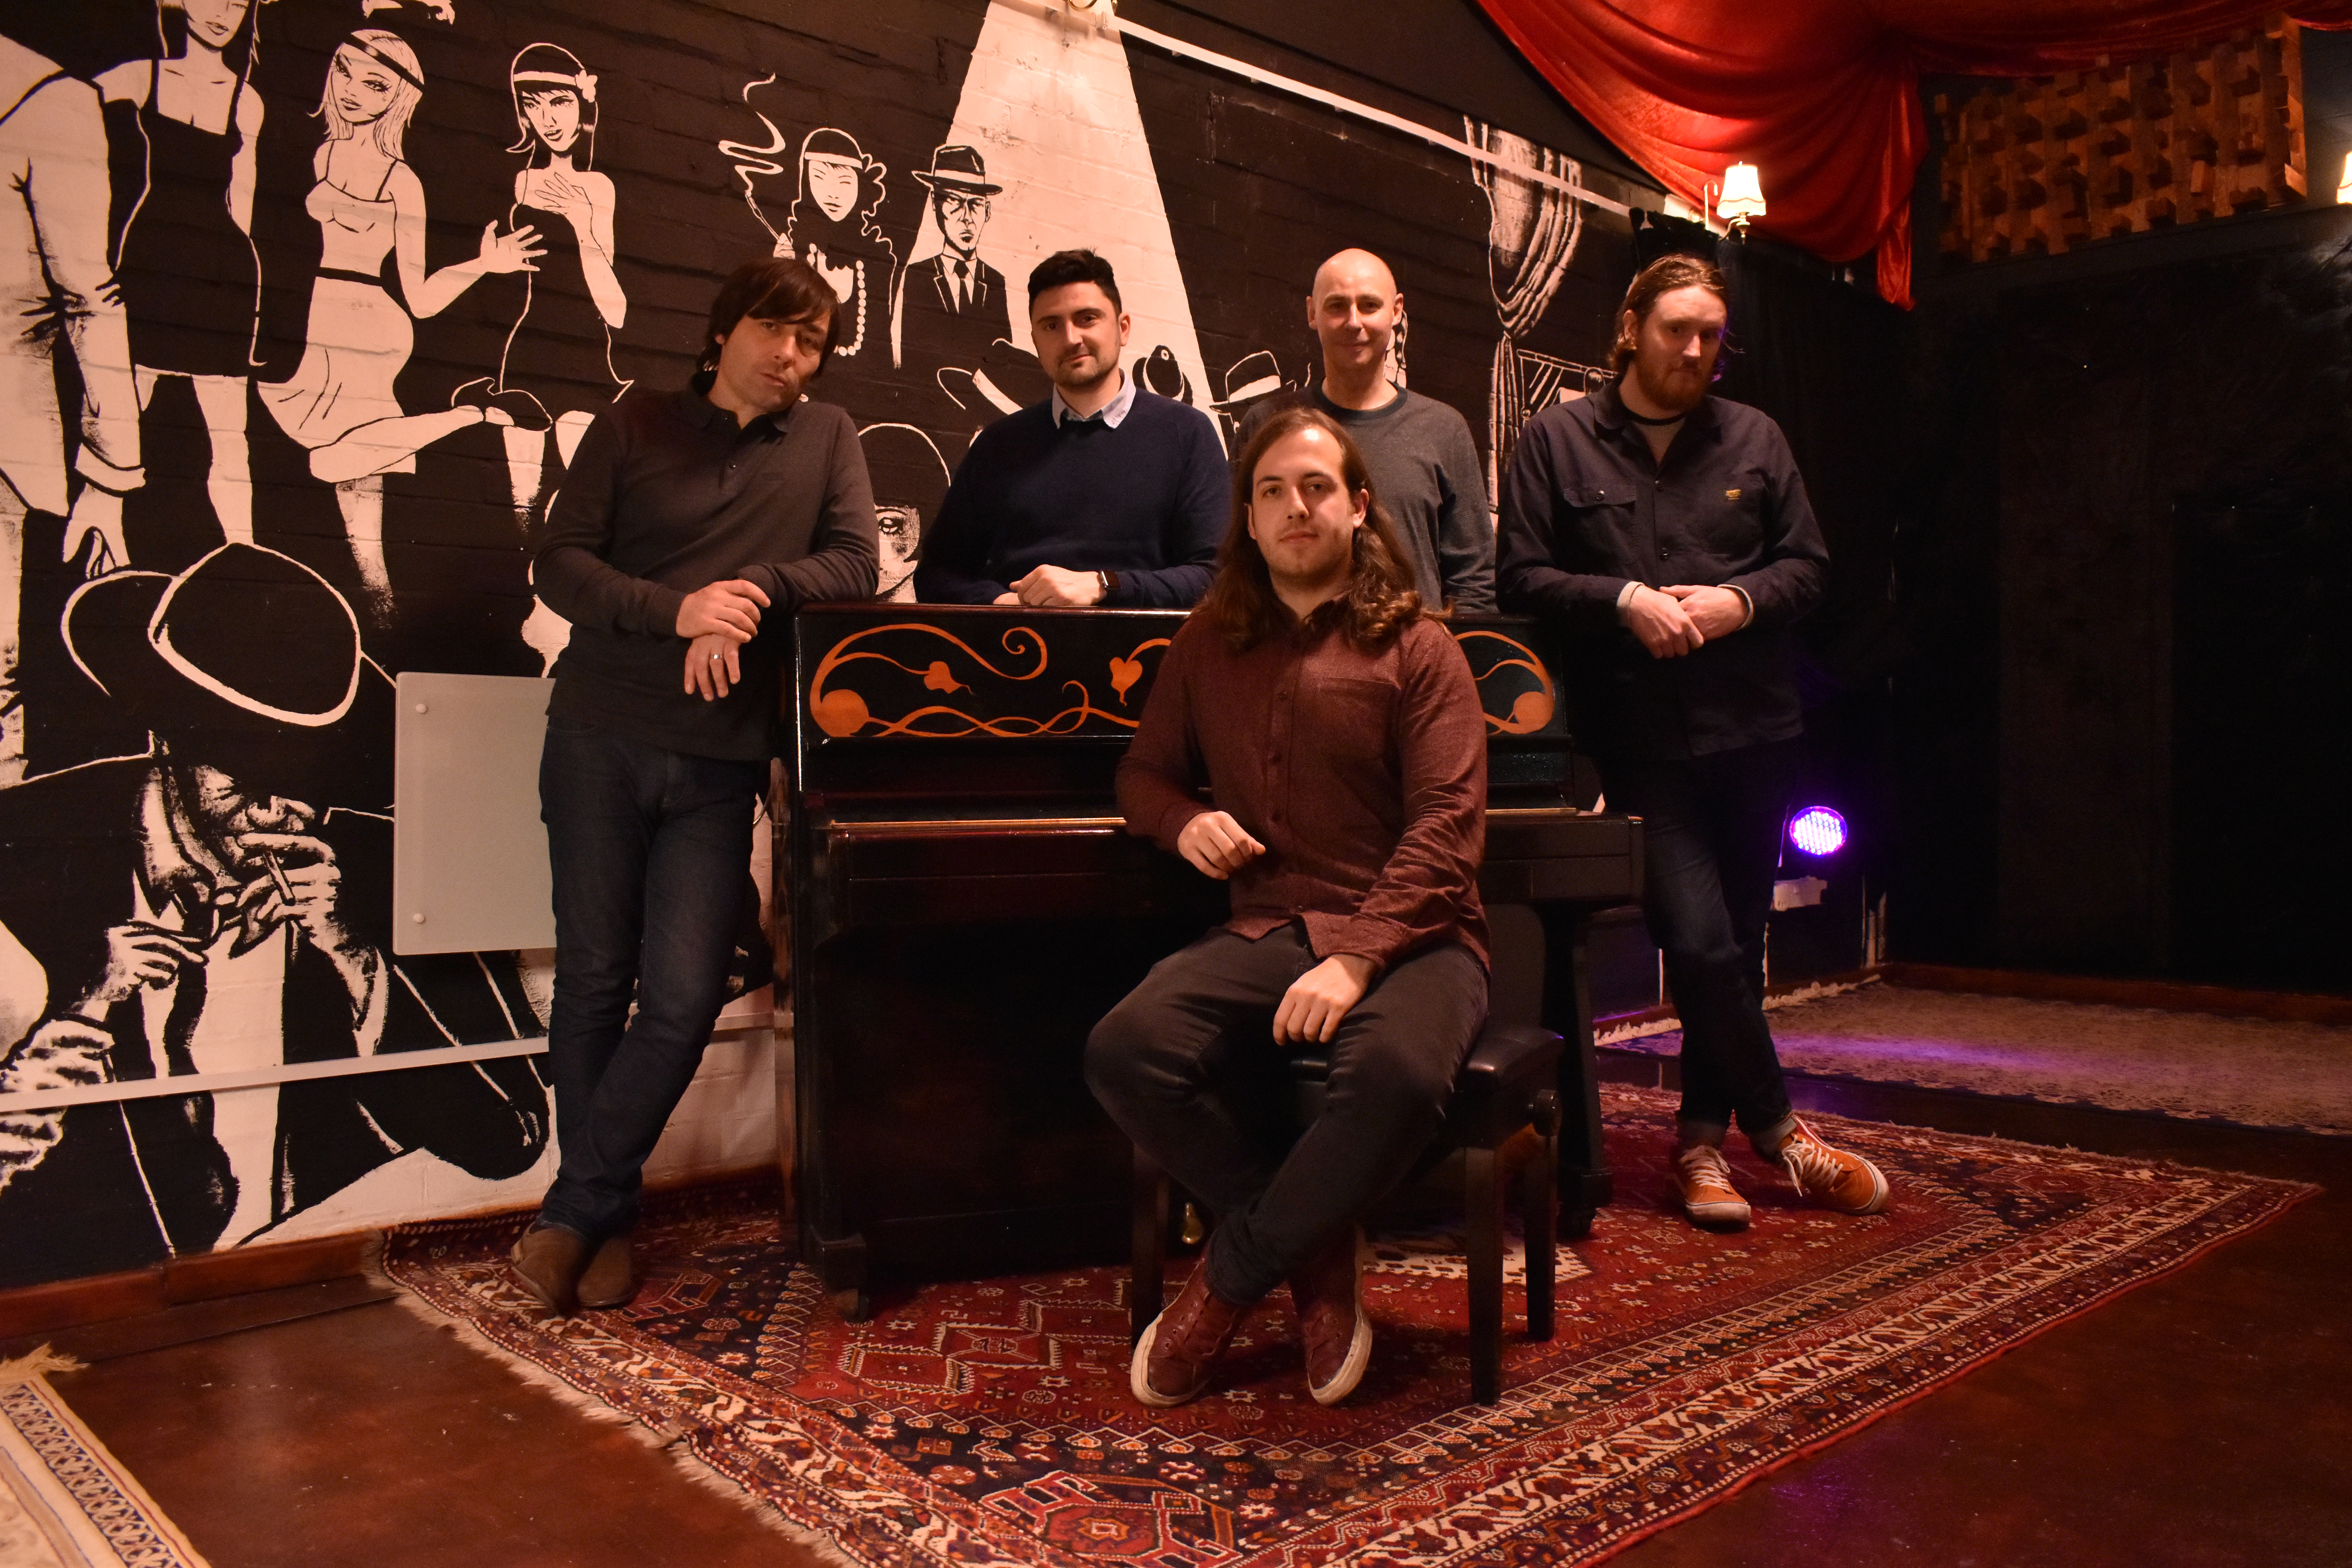   Nottingham’s Music Scene in the Spotlight with Launch of Moonshine Sessions   A collaboration between Gigantic Tickets and Alchemistic music borne out of a shared commitment to live music […]